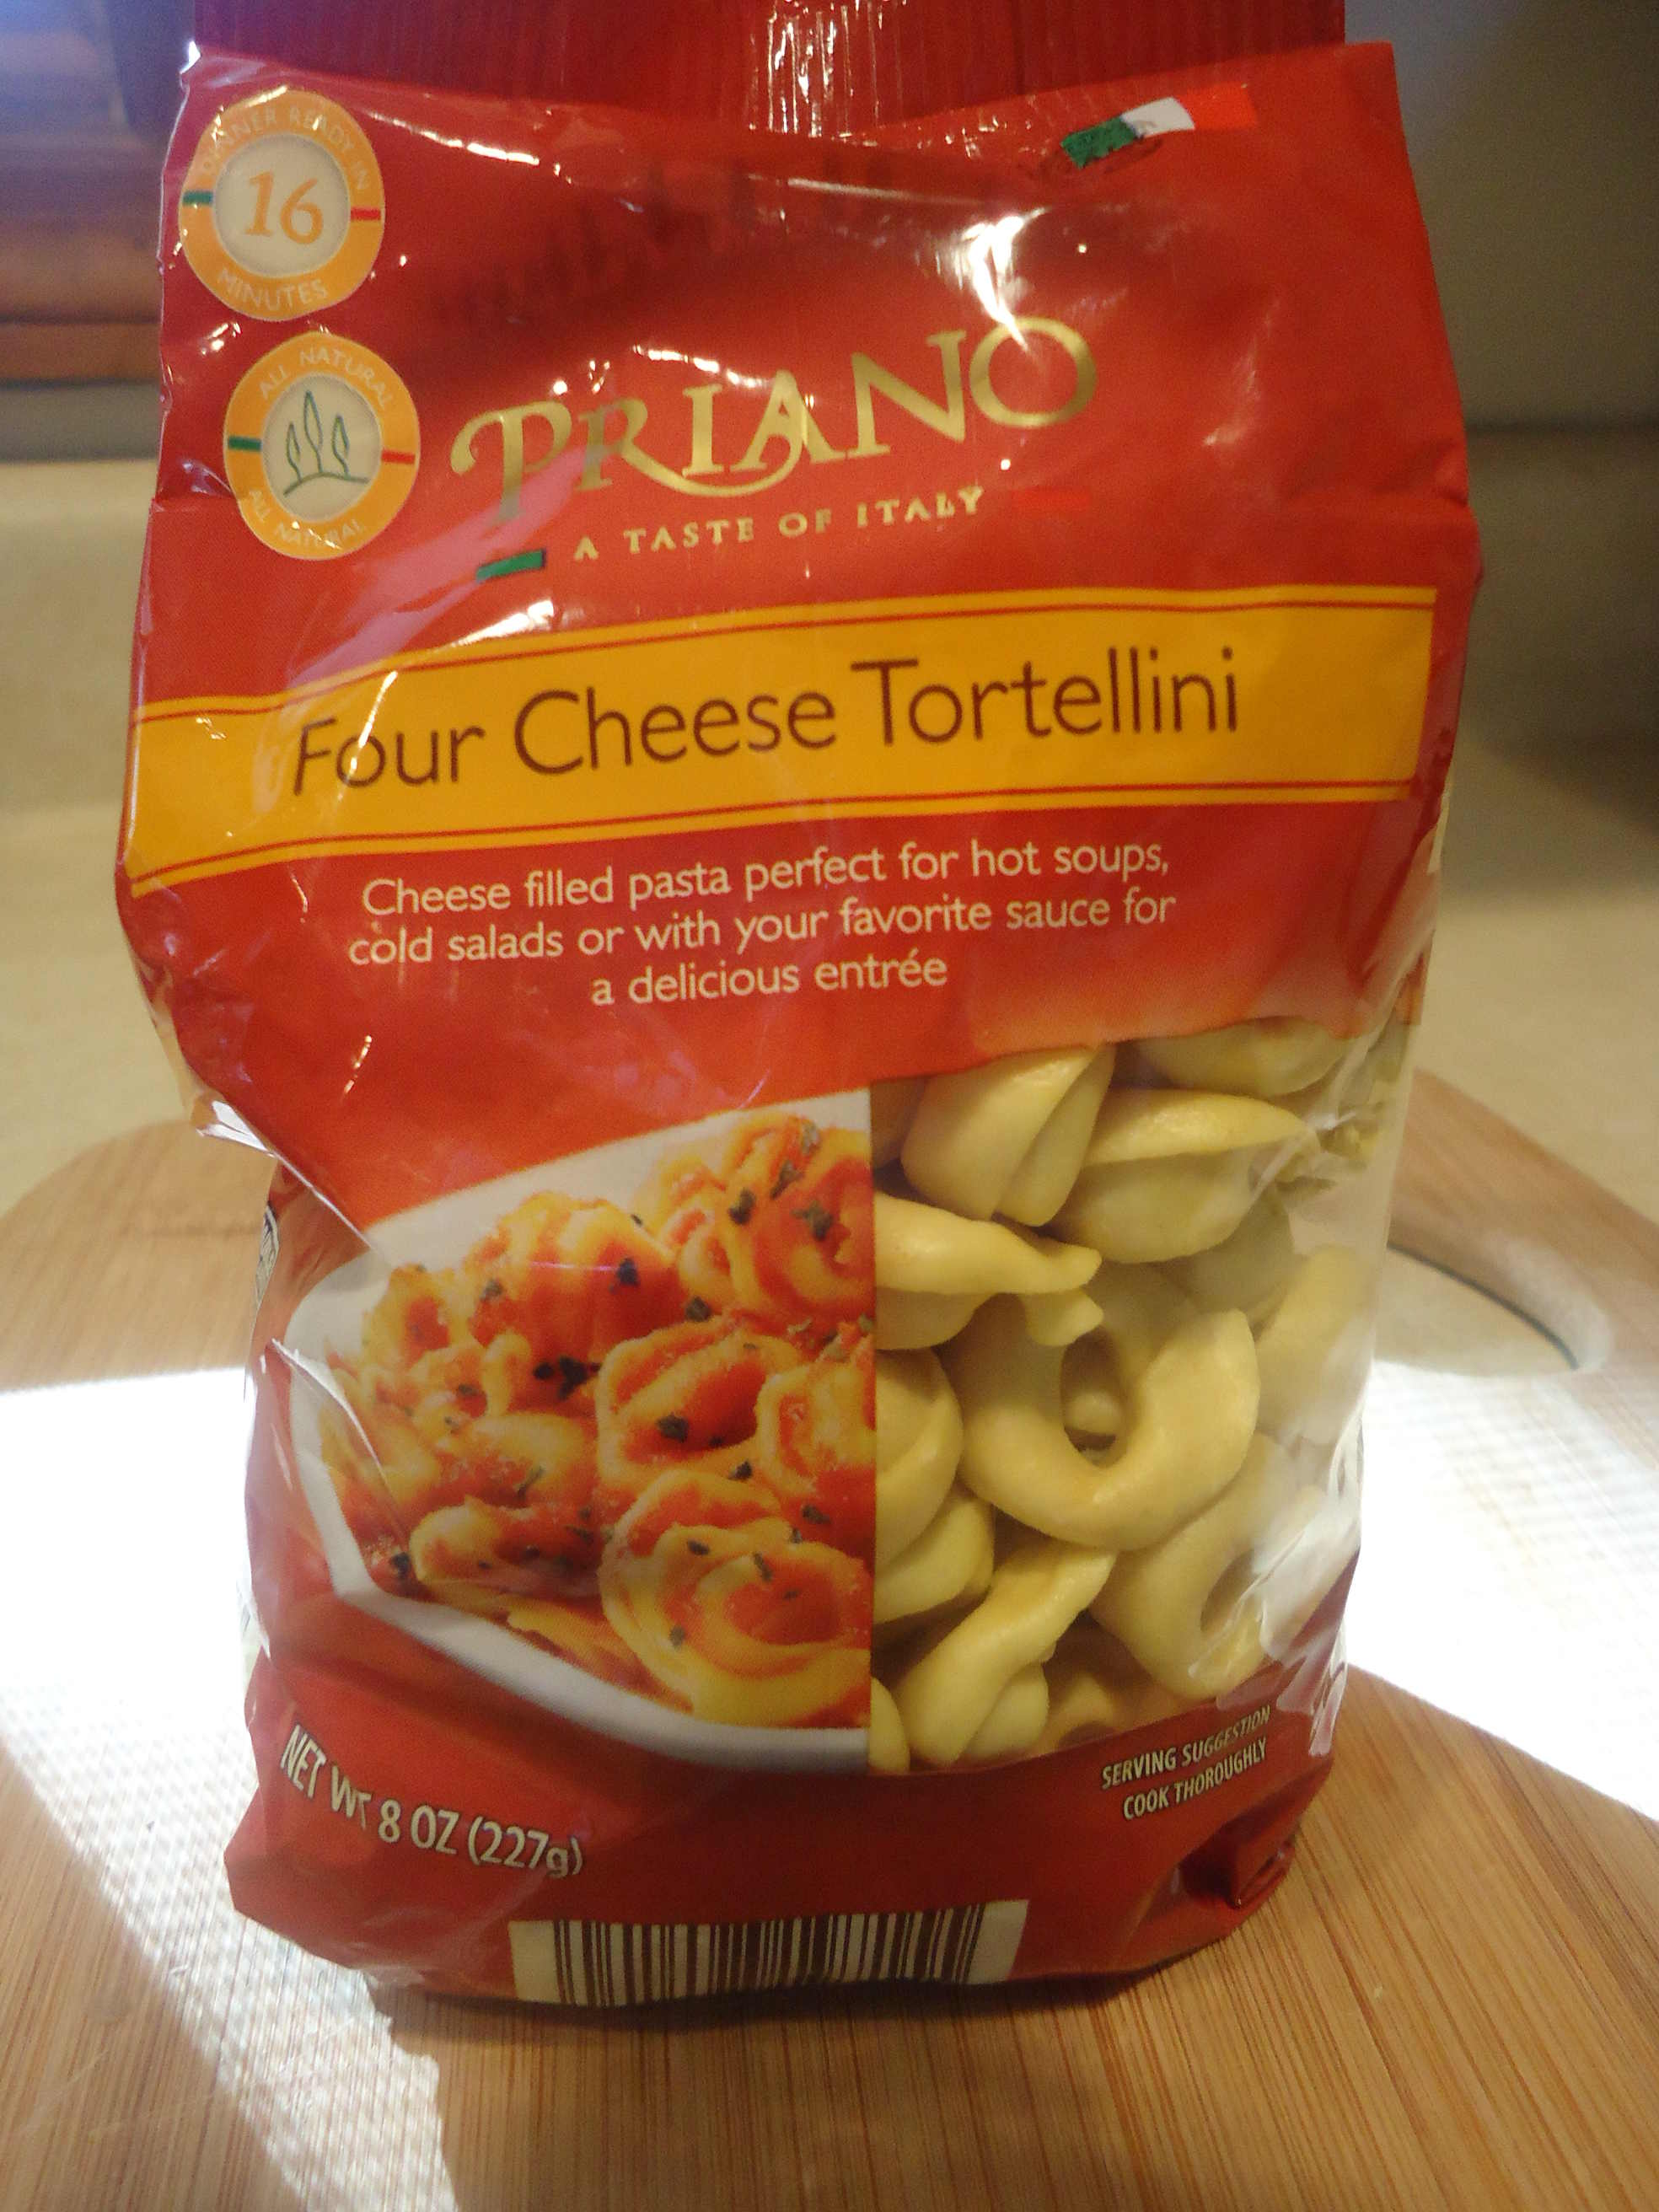 4 cheese tortellini in a red bag.